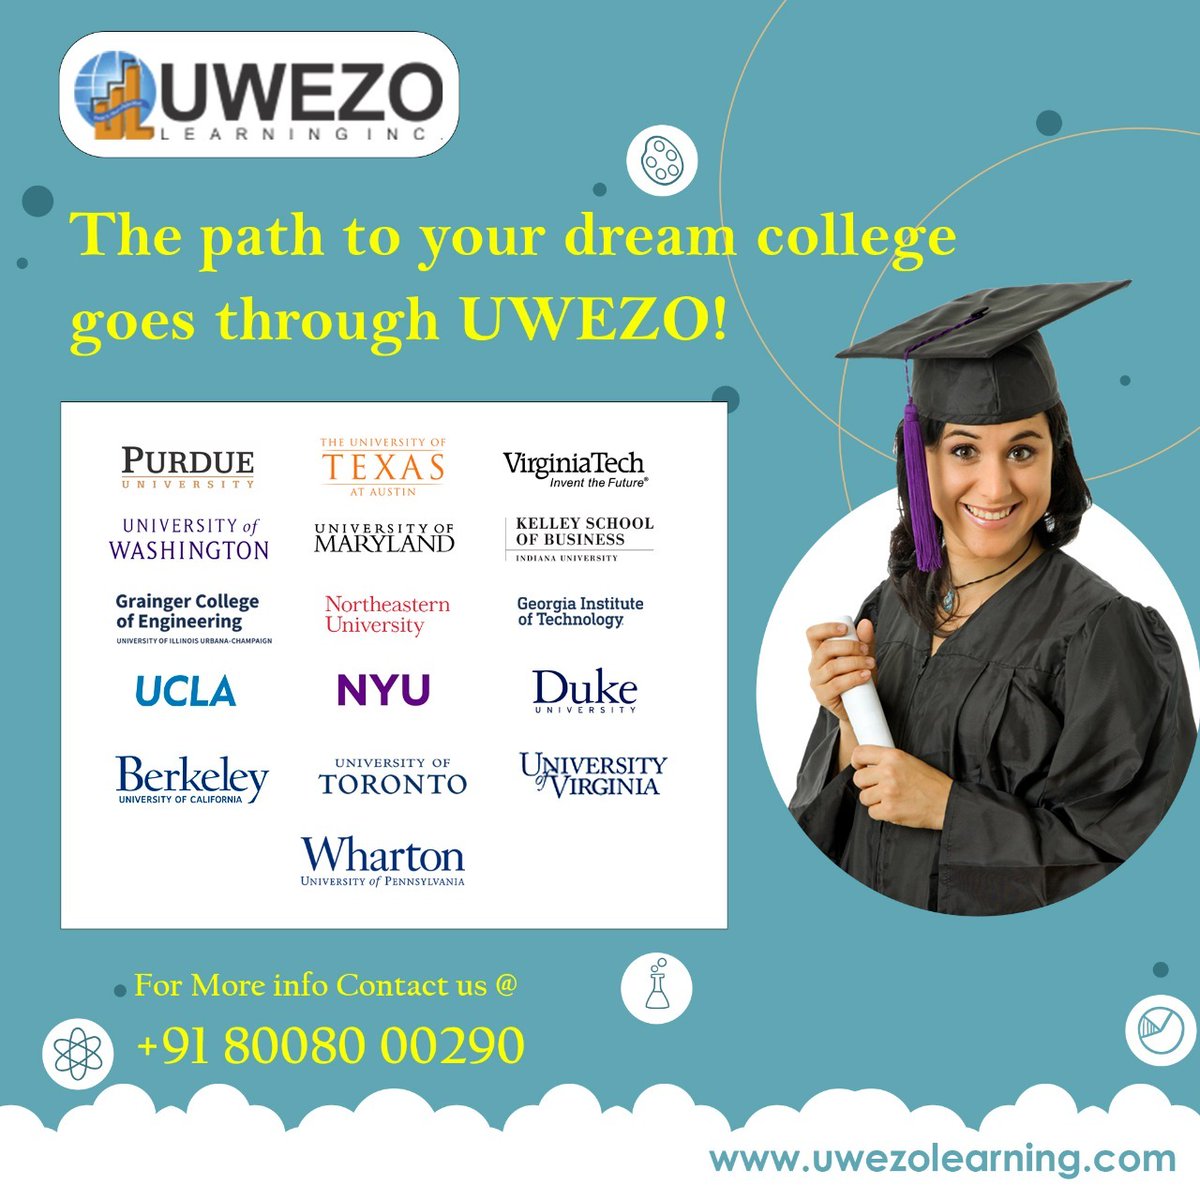 The path to your dream college goes through Uwezo!

For more information Contact
📞 +91 8008000290
🌐 uwezolearning.com

#uwezo #studyabroad #abroadeducation #career #careercounseling #careergoals #SAT #pat #ielts #ieltspreparation #act #studyinabroad #studyabroadusa